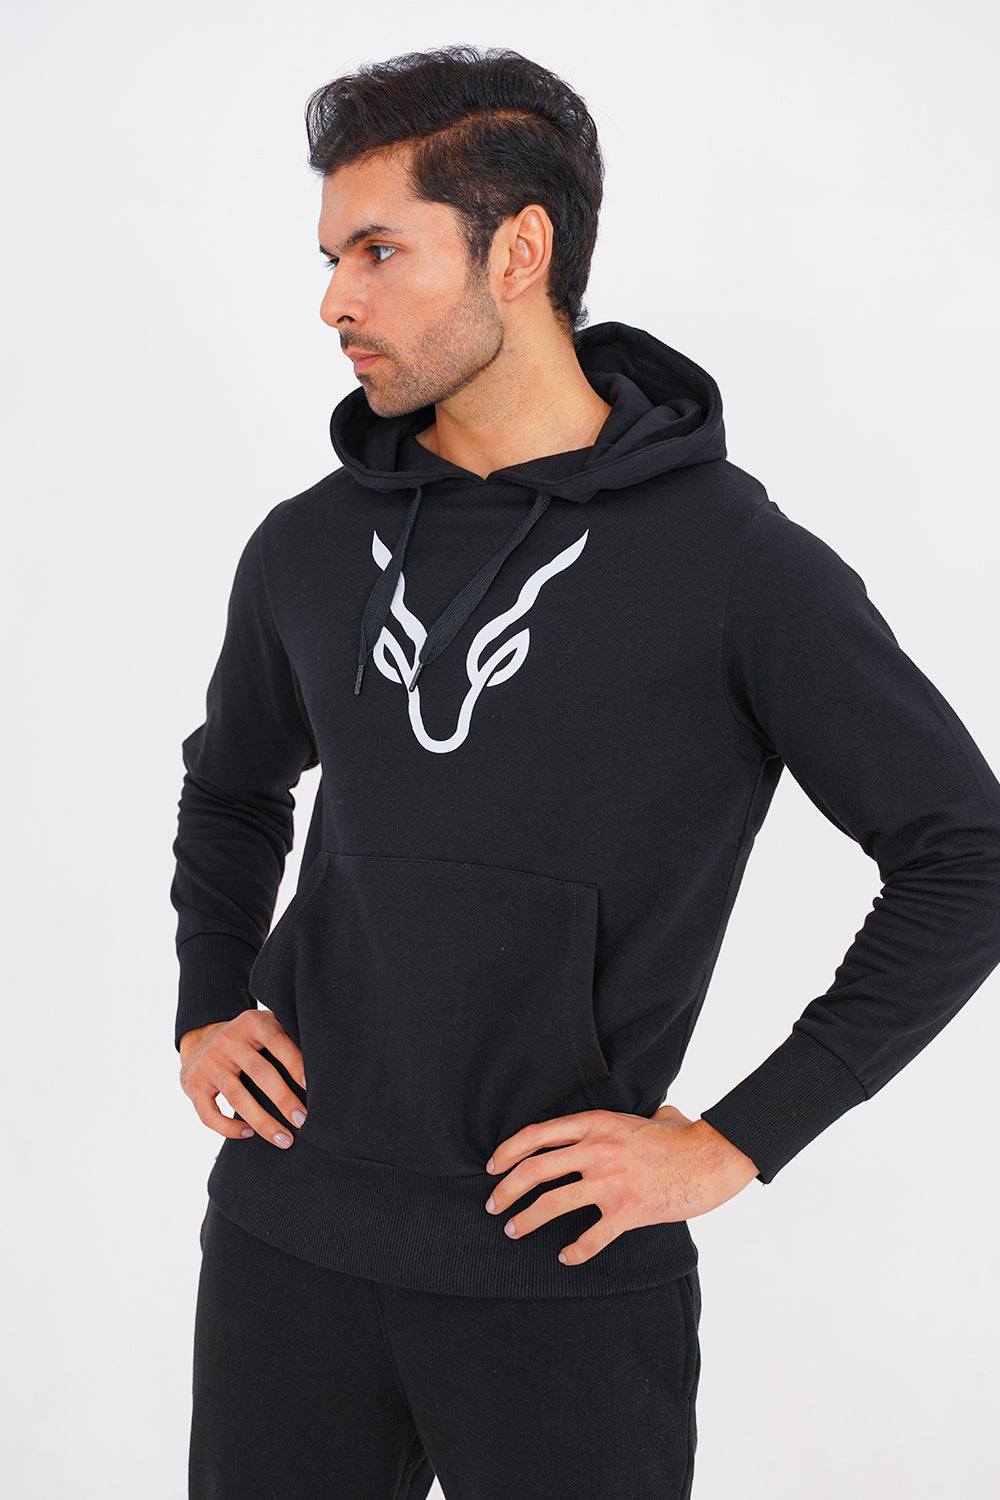 Classic Markhor Hoodie - Black by Zalmi Store | Stylish Casual Outfit